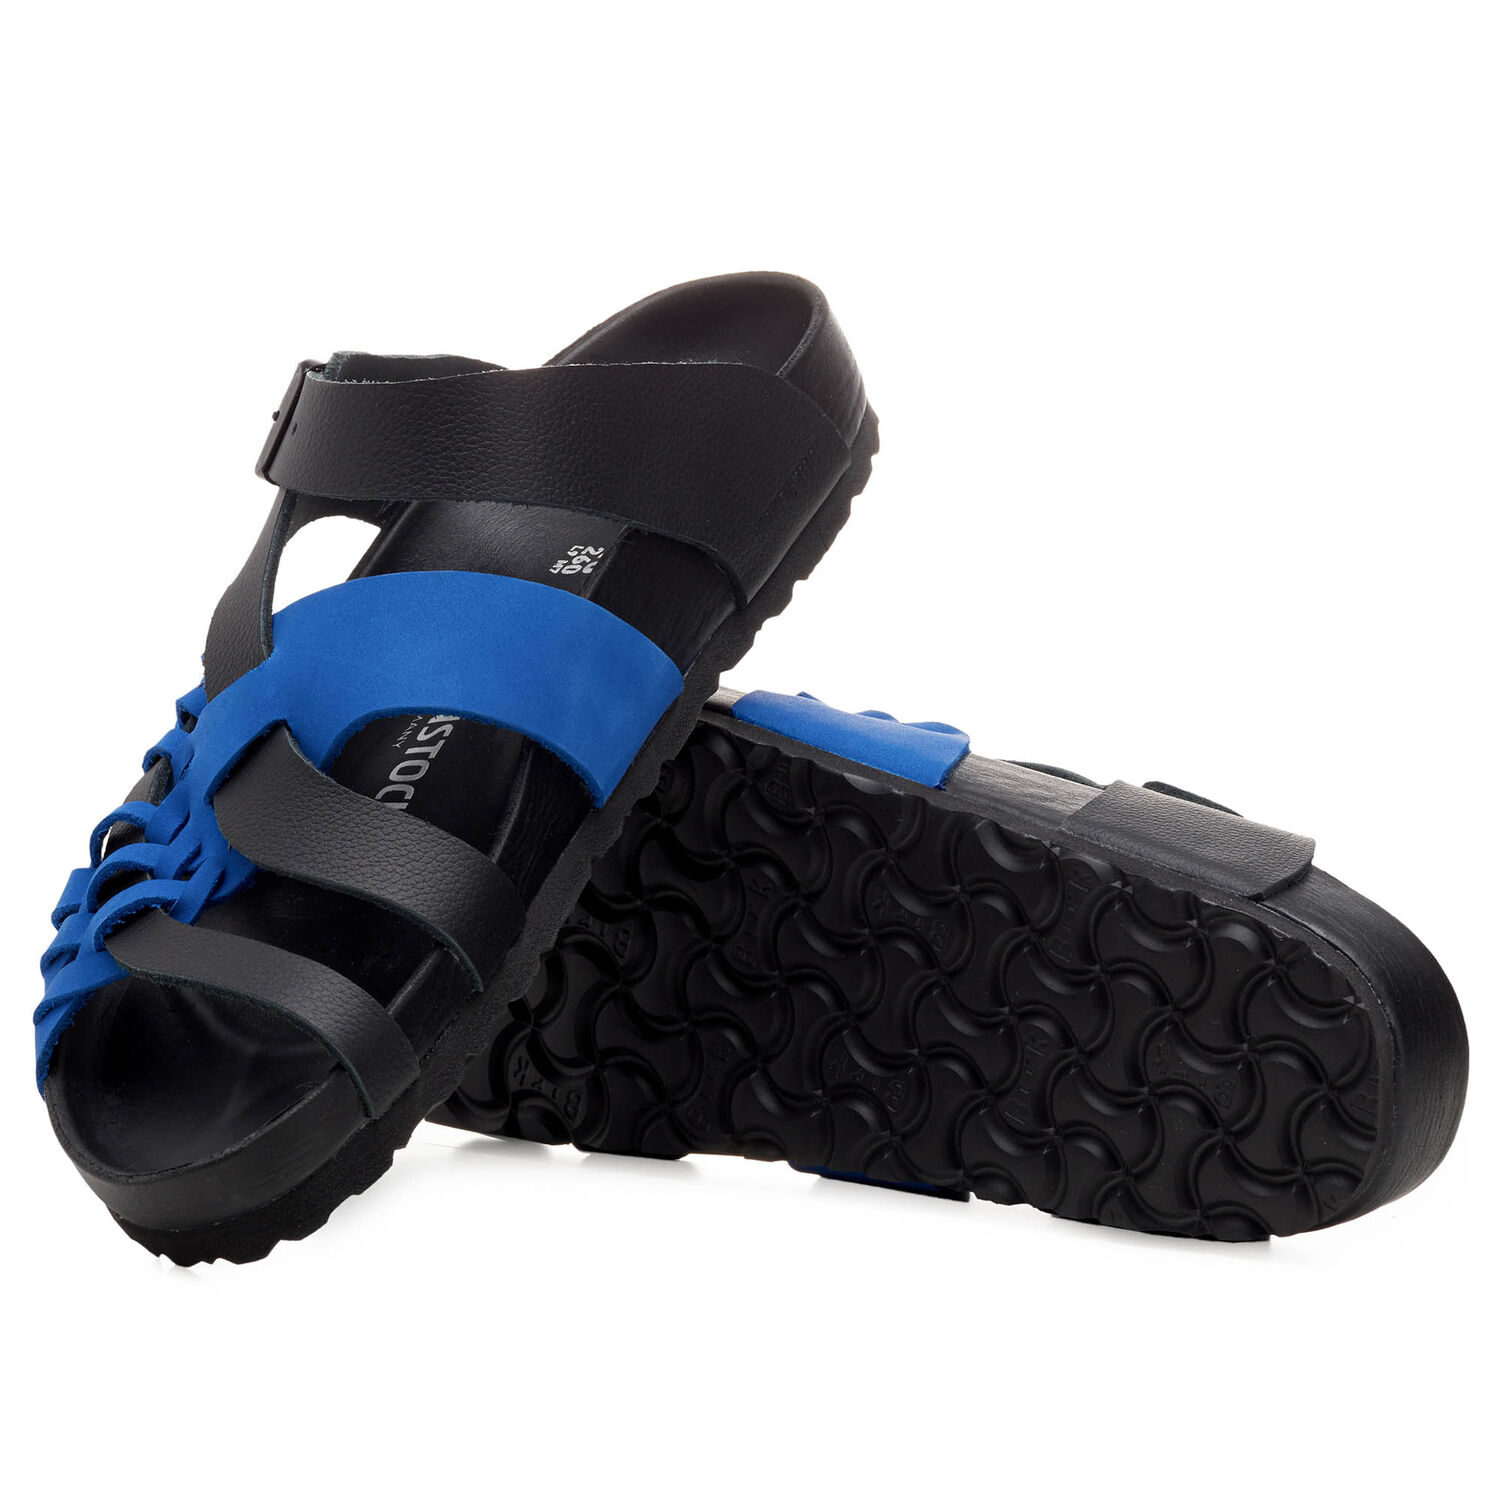 Birkenstock 1774 CMS Tallahassee Archive Re-Issue Style Black/Blue